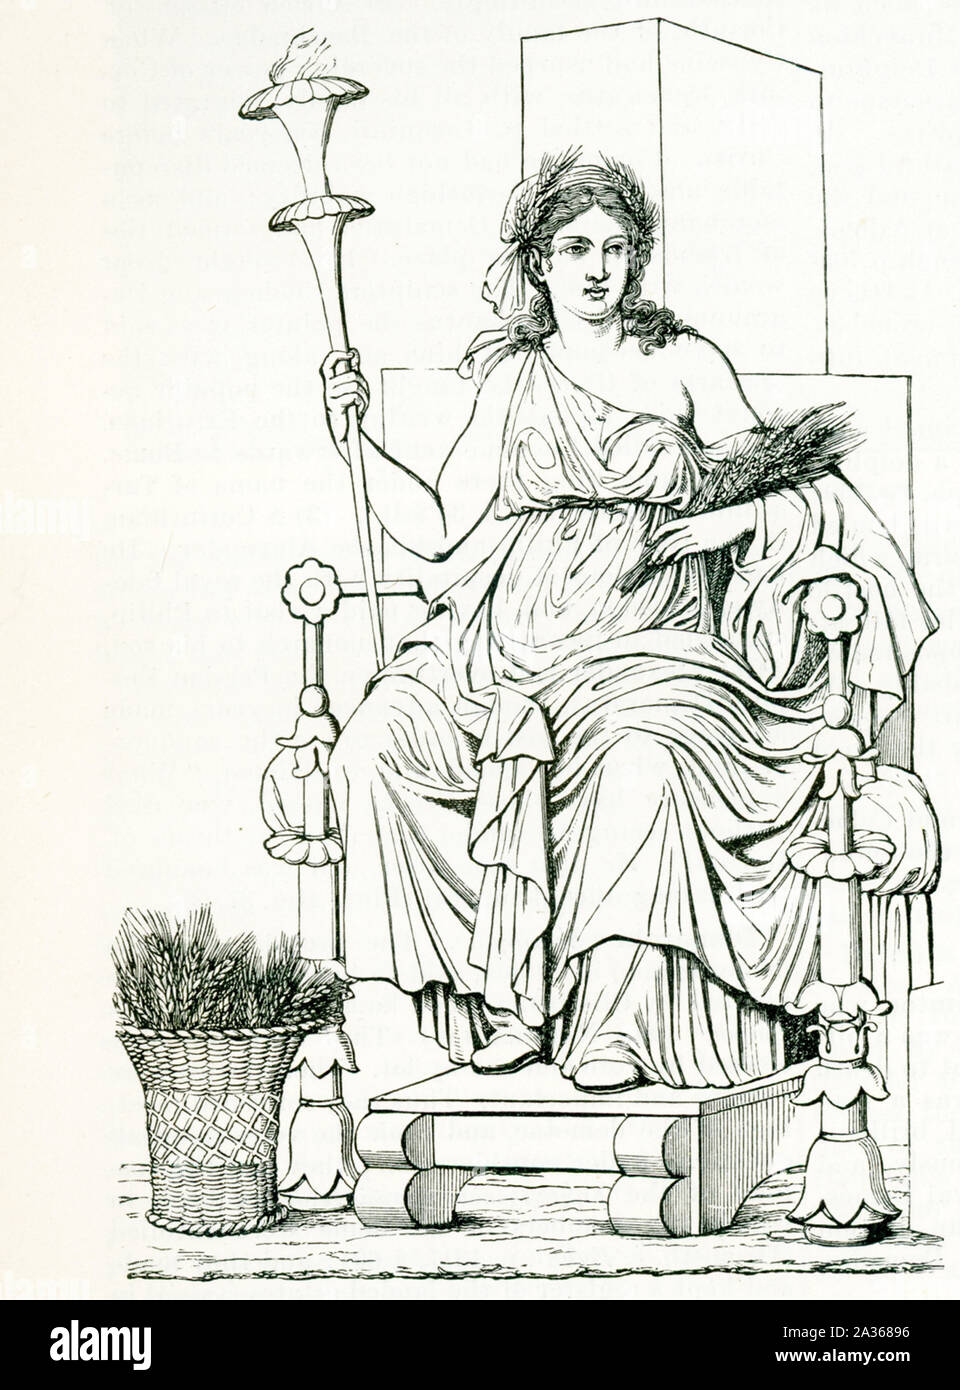 Pictured here is the Greek goddess Demeter, taken from a mural painting in Pompeii(the italian owen destroyed in 79 A.D. in the eruption of Vesuvius.  Demeter is the goddess of the harvest and presides over grains and the fertility of the earth. Although she was most often referred to as the goddess of the harvest, she was also goddess of sacred law and the cycle of life and death. Her Roman counterpart was Ceres. Stock Photo